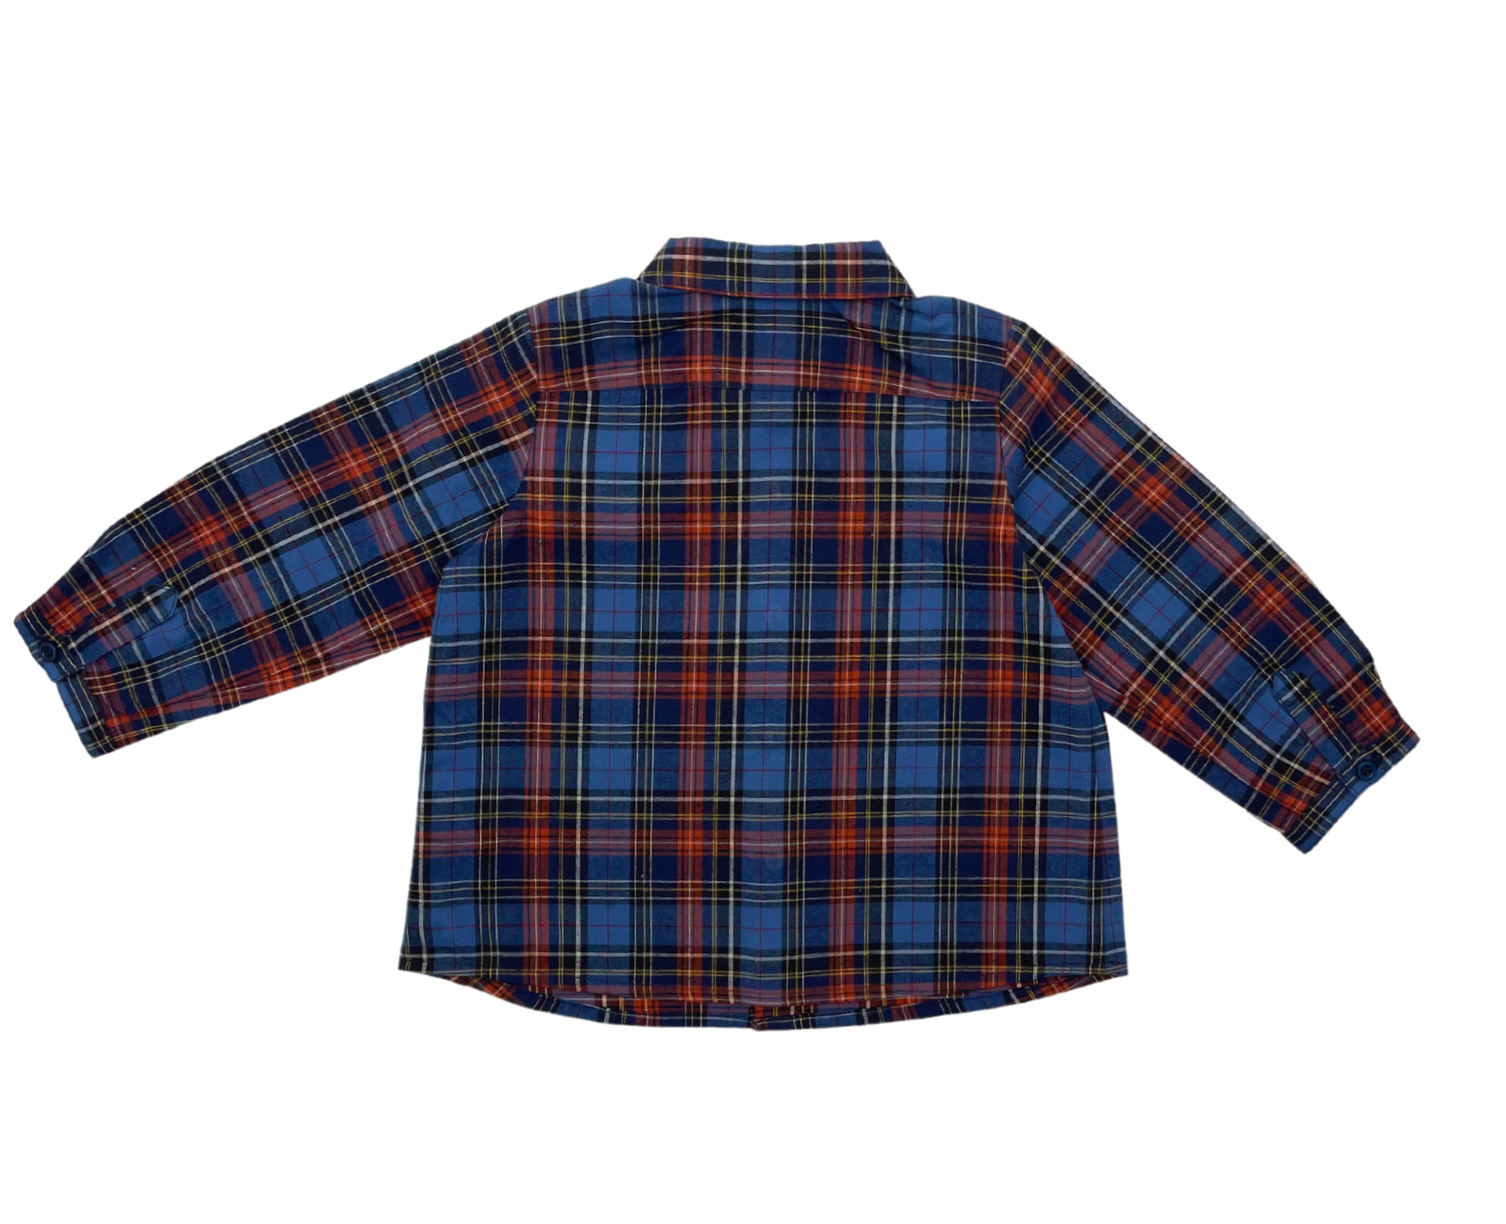 BONPOINT - Checked shirt - 1 year old